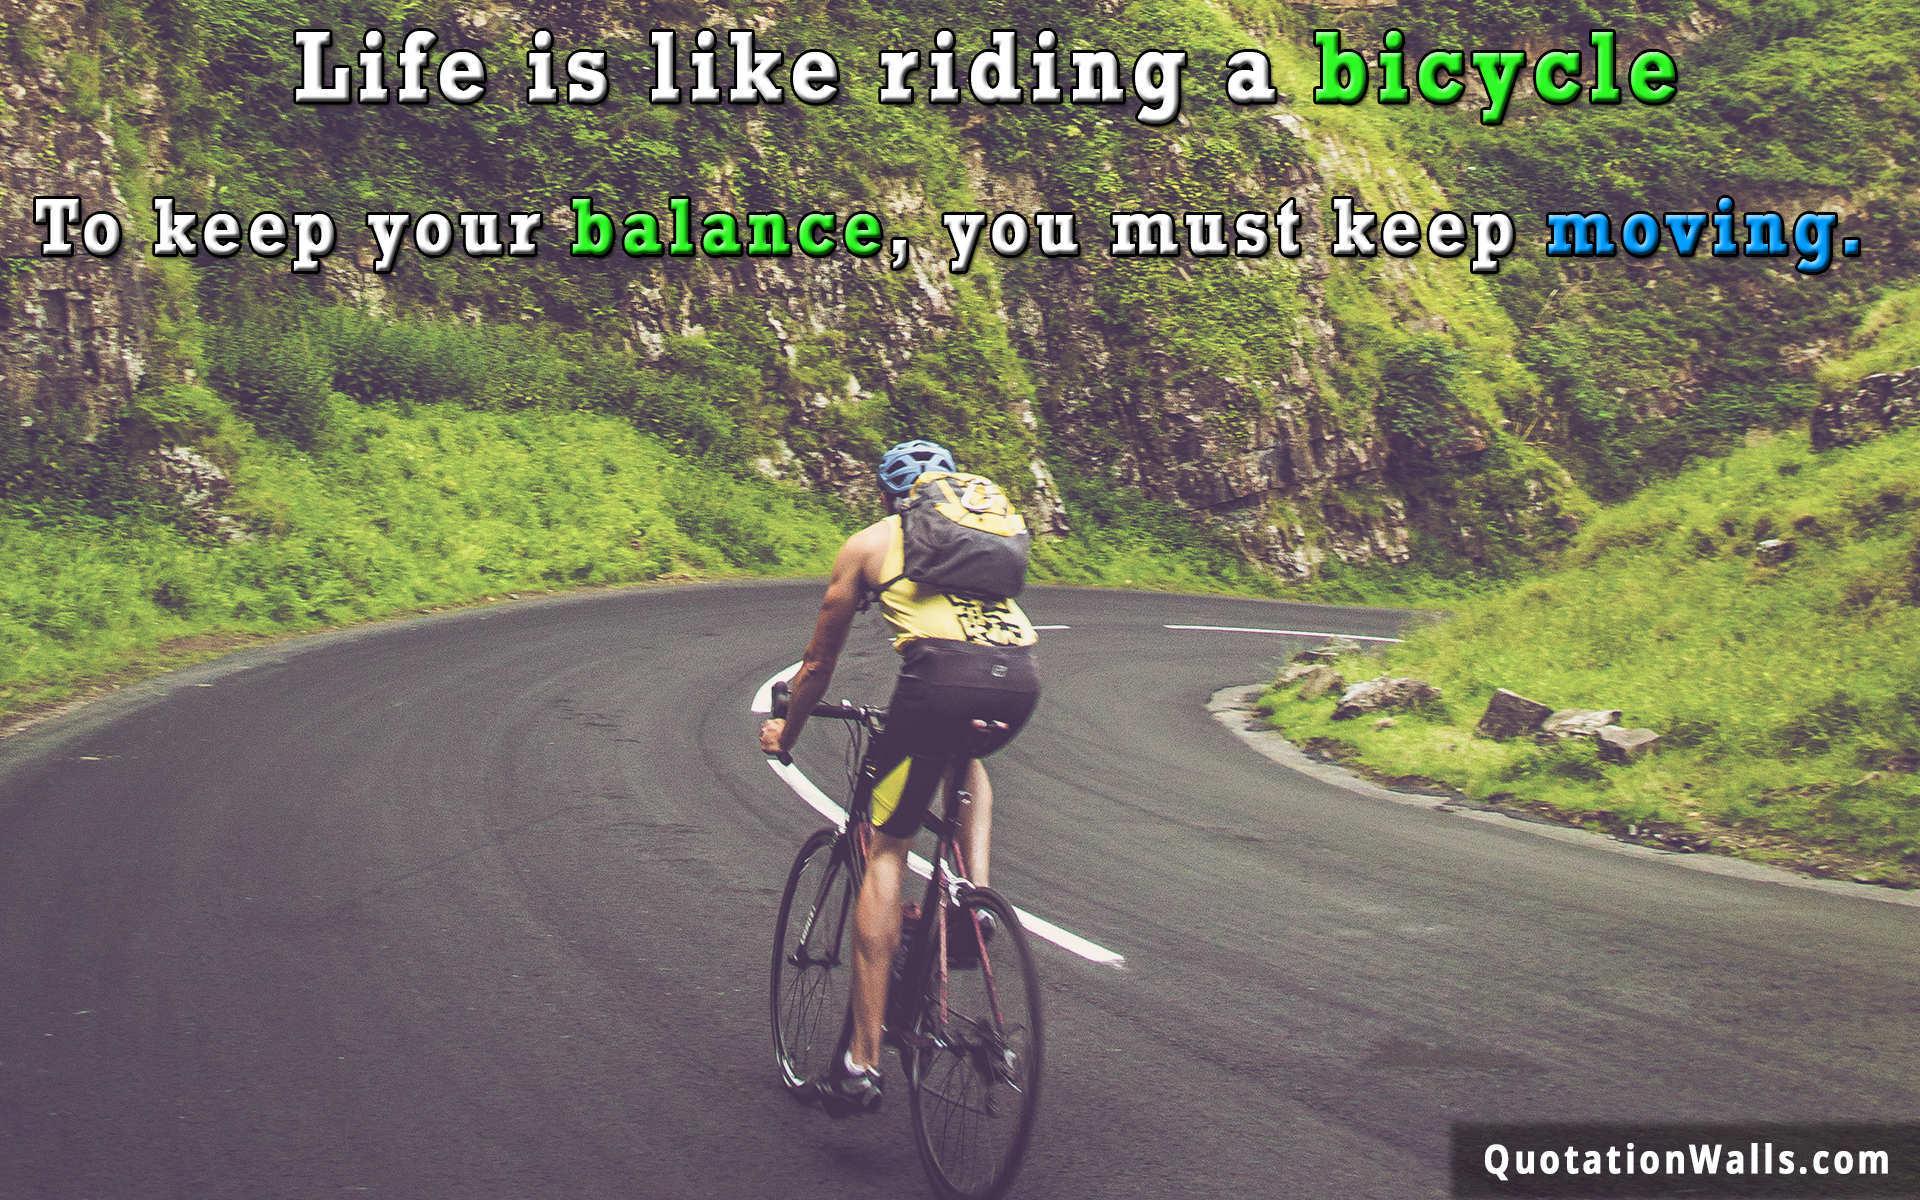 Keep moving quotes images wallpapers for desktop pictures desktop backgrounds hd photos free download